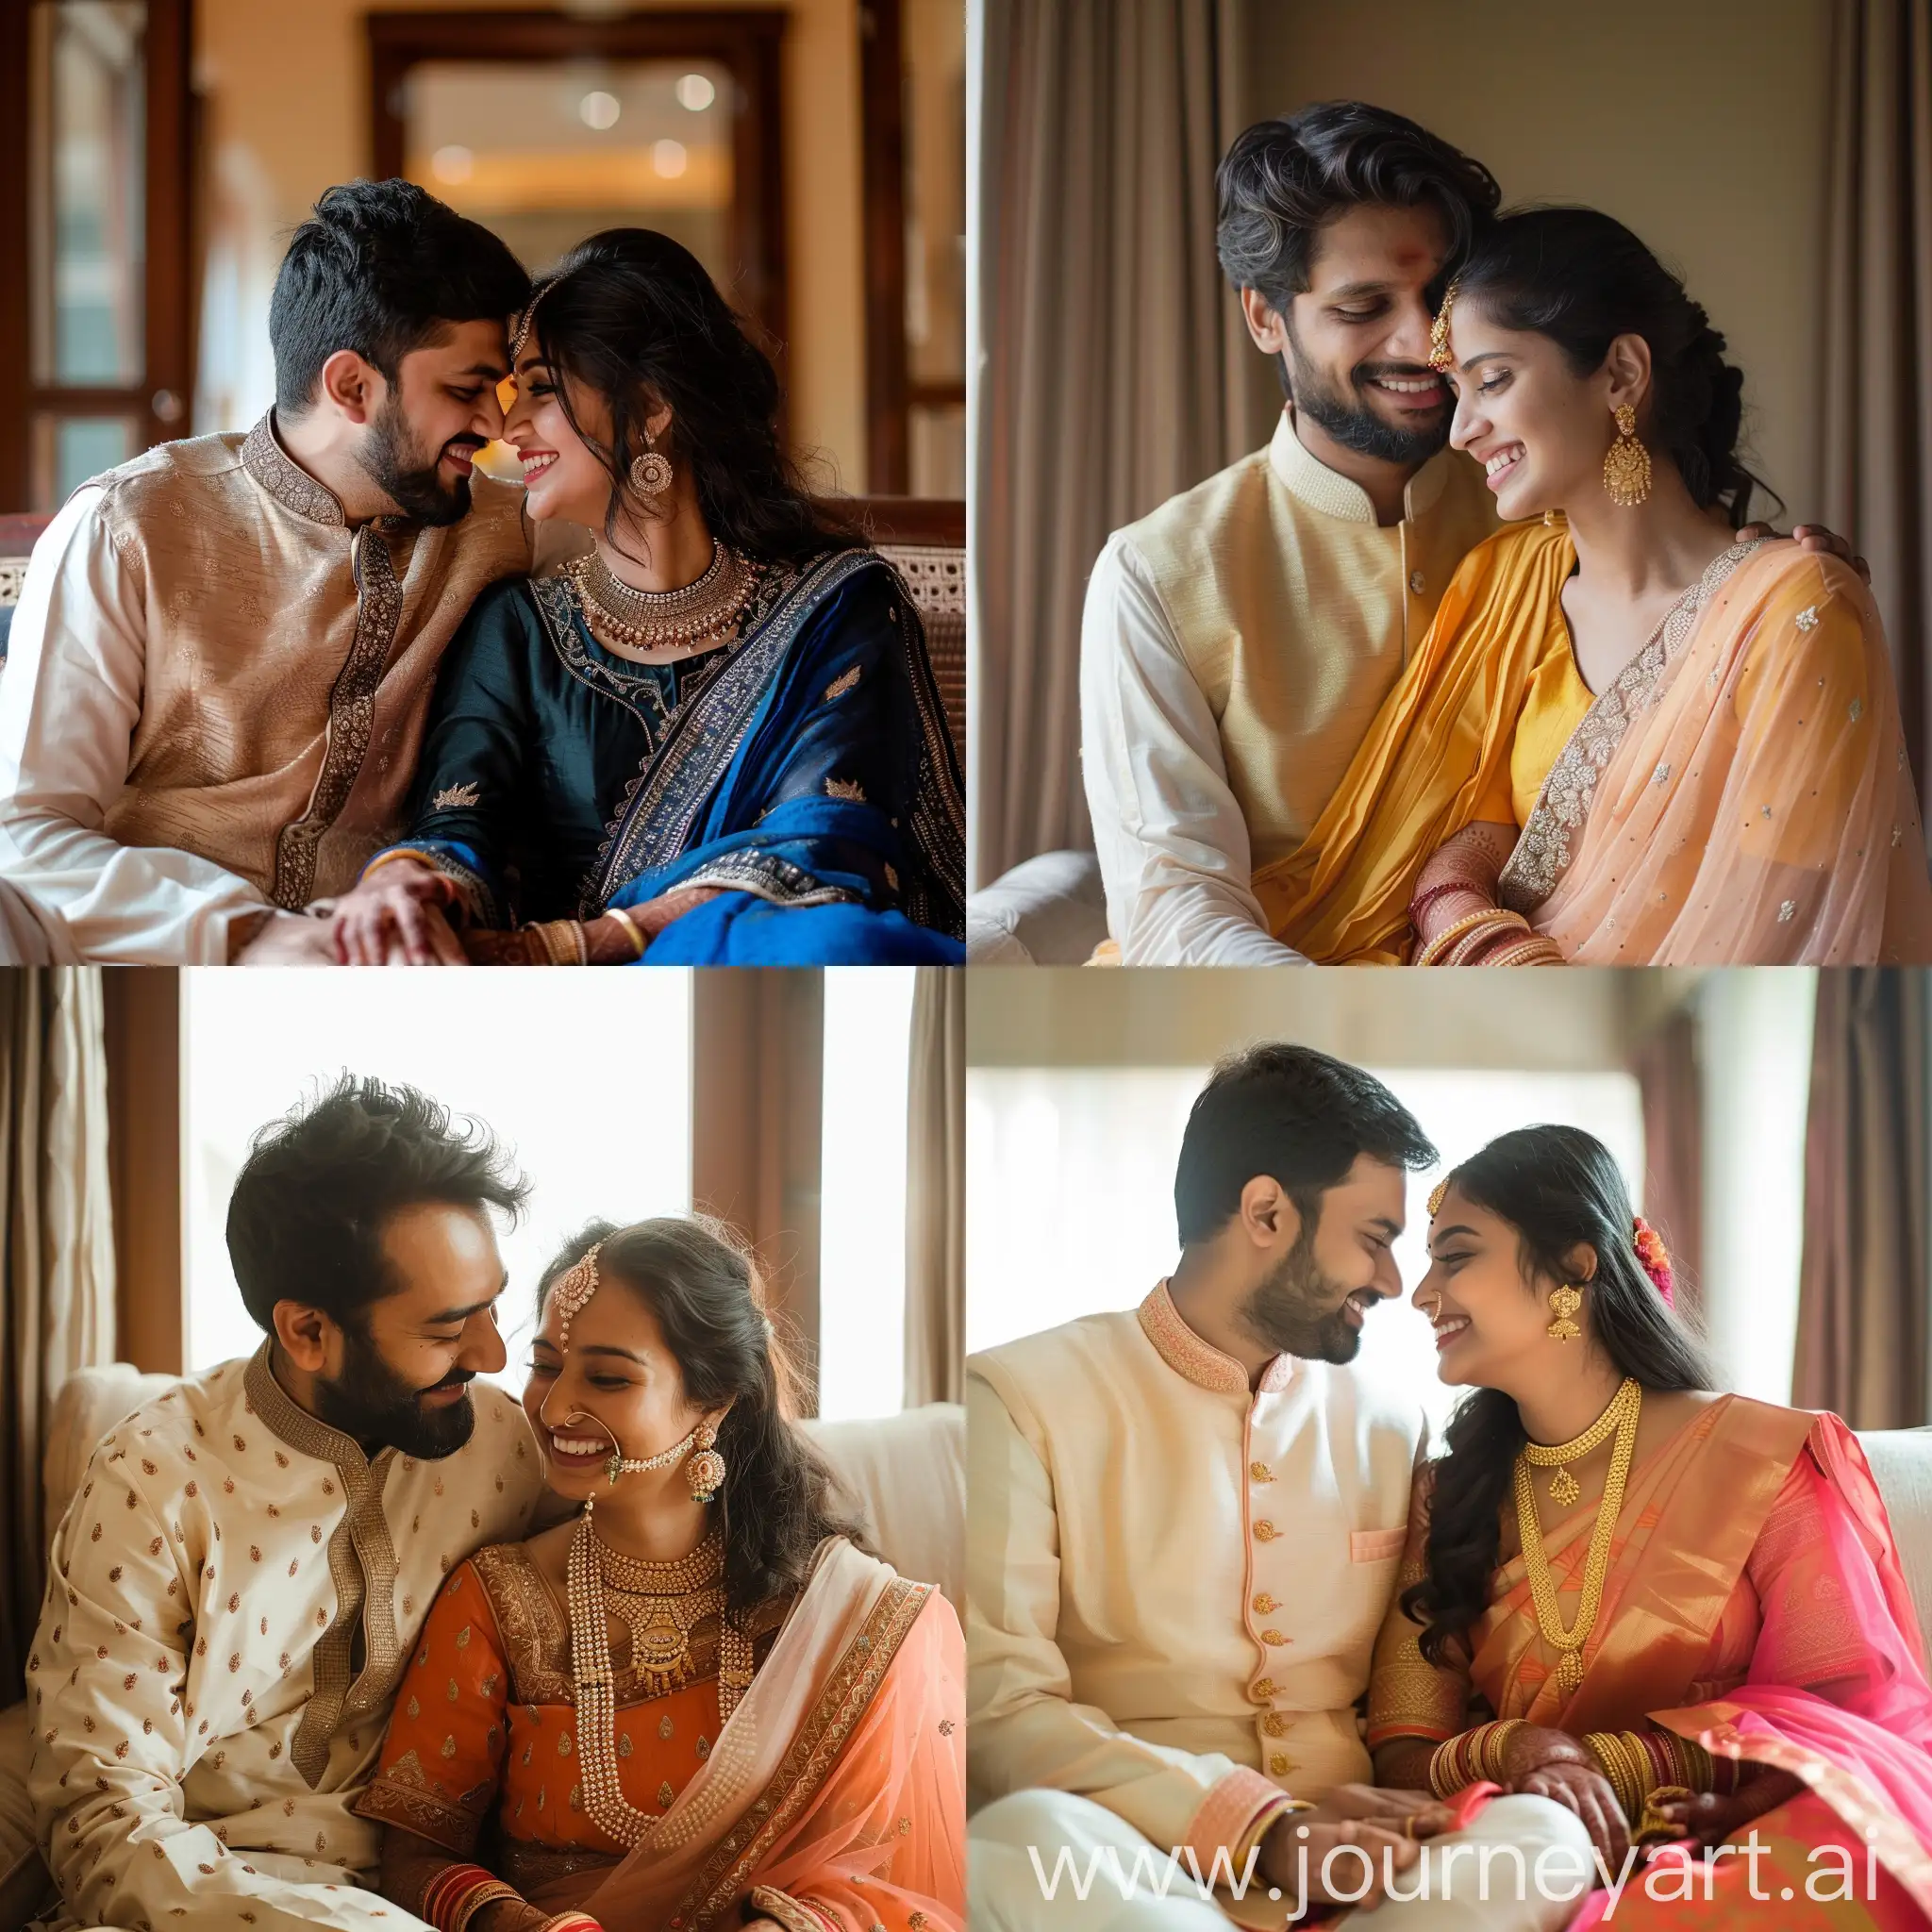 Indian-Couple-Romantic-Day-at-Home-Intimate-Moments-and-Affection-in-a-Cozy-Setting